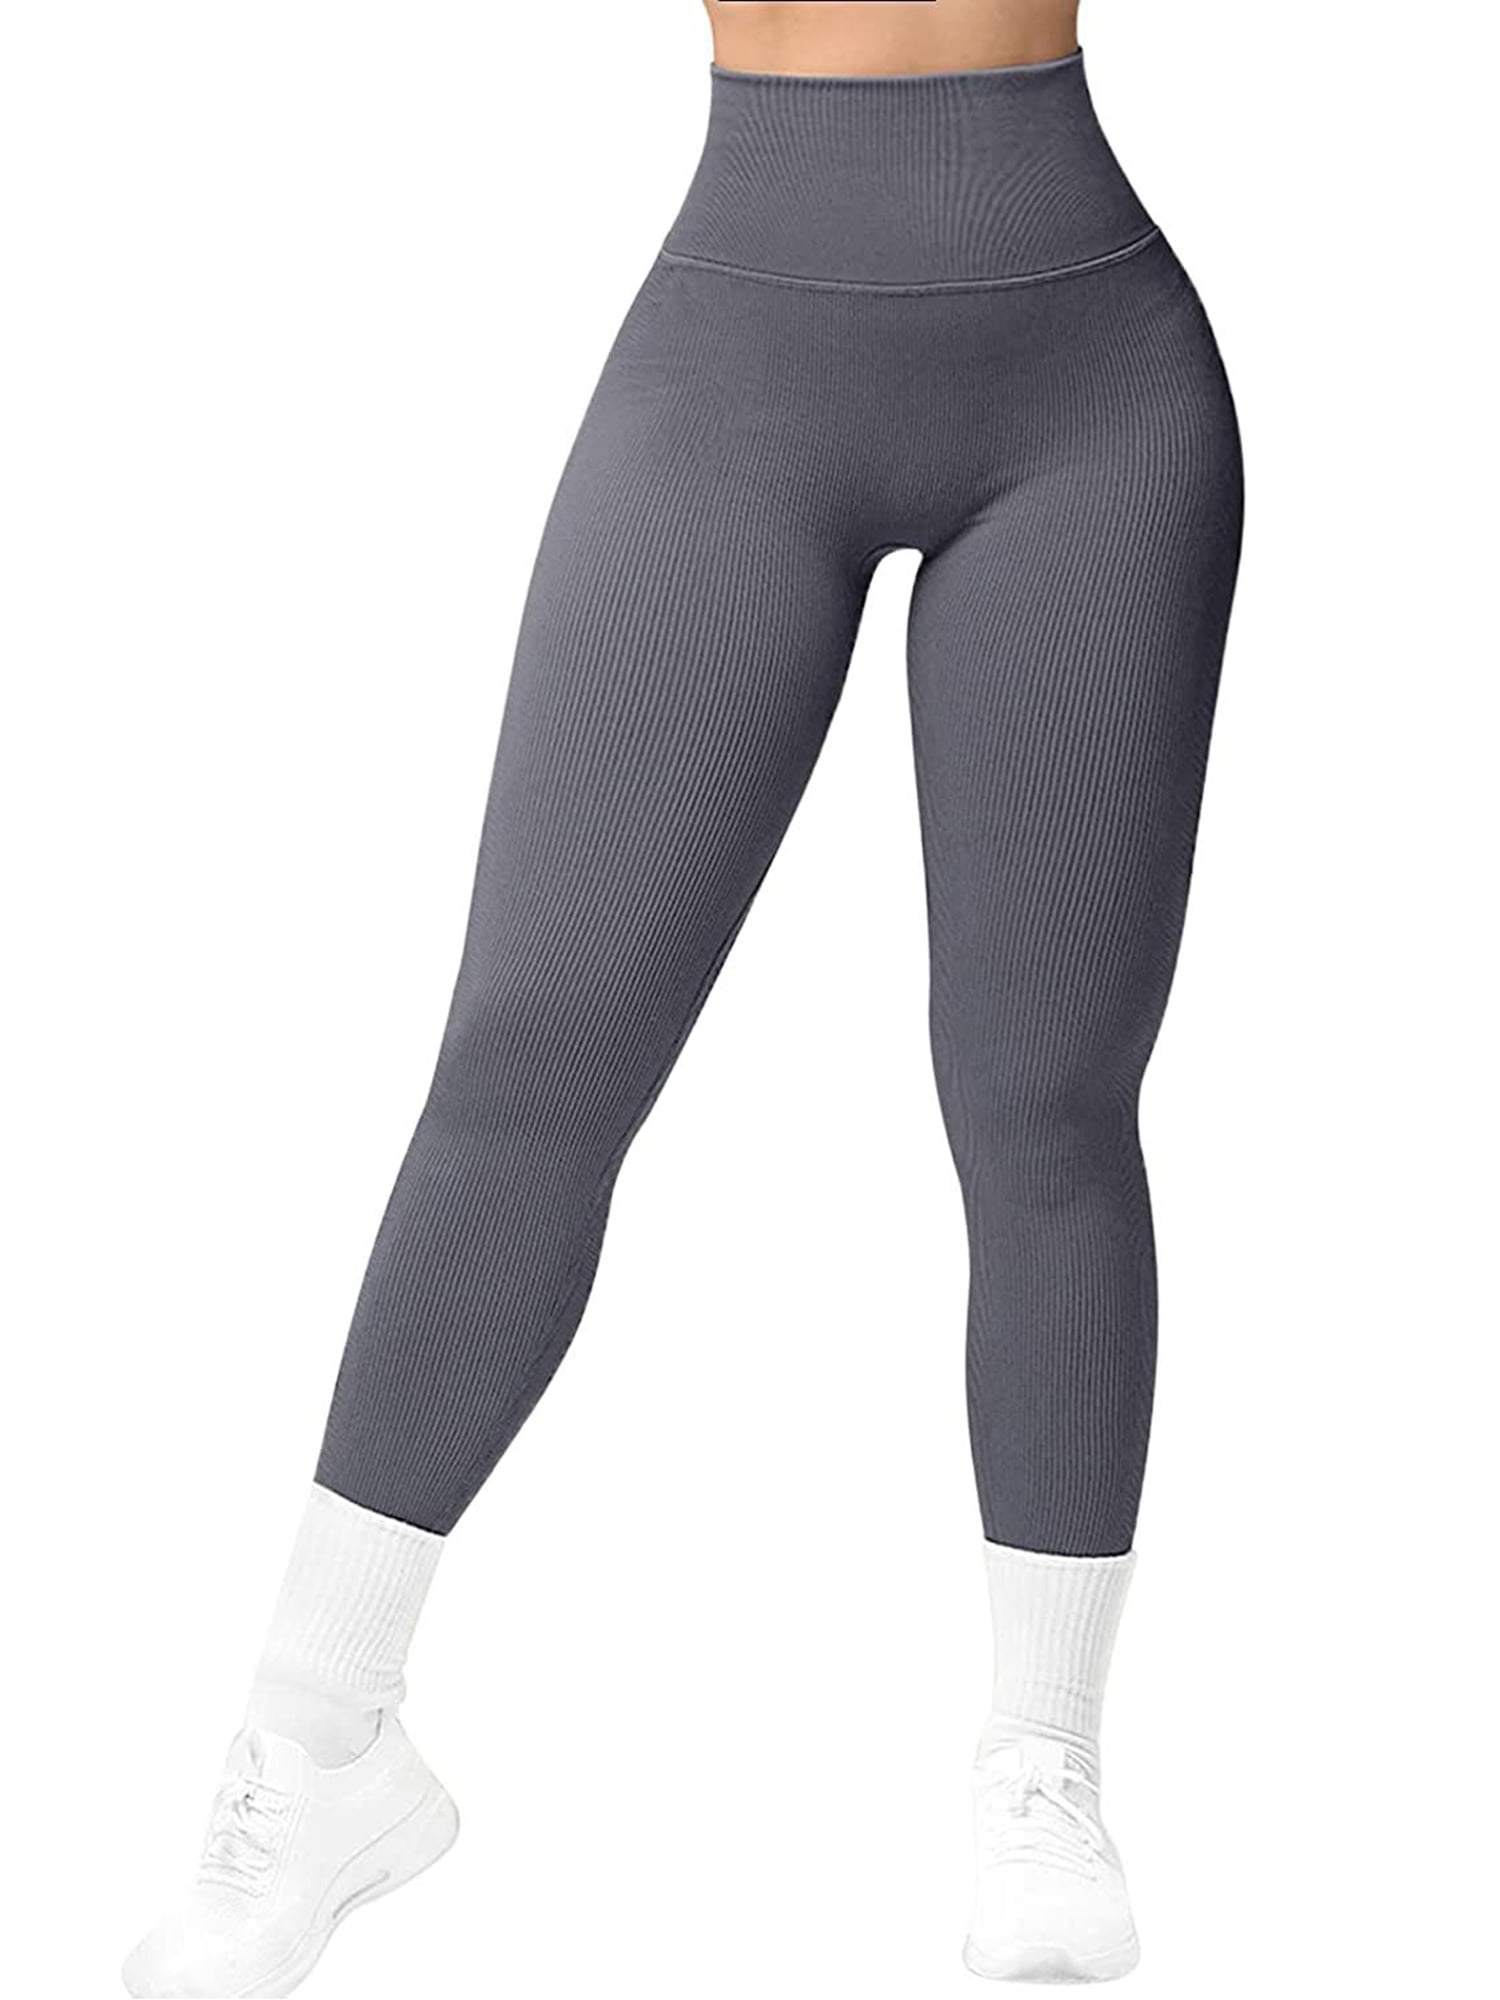 Genuiskids Women's Workout Leggings Solid Color Ribbed Sports